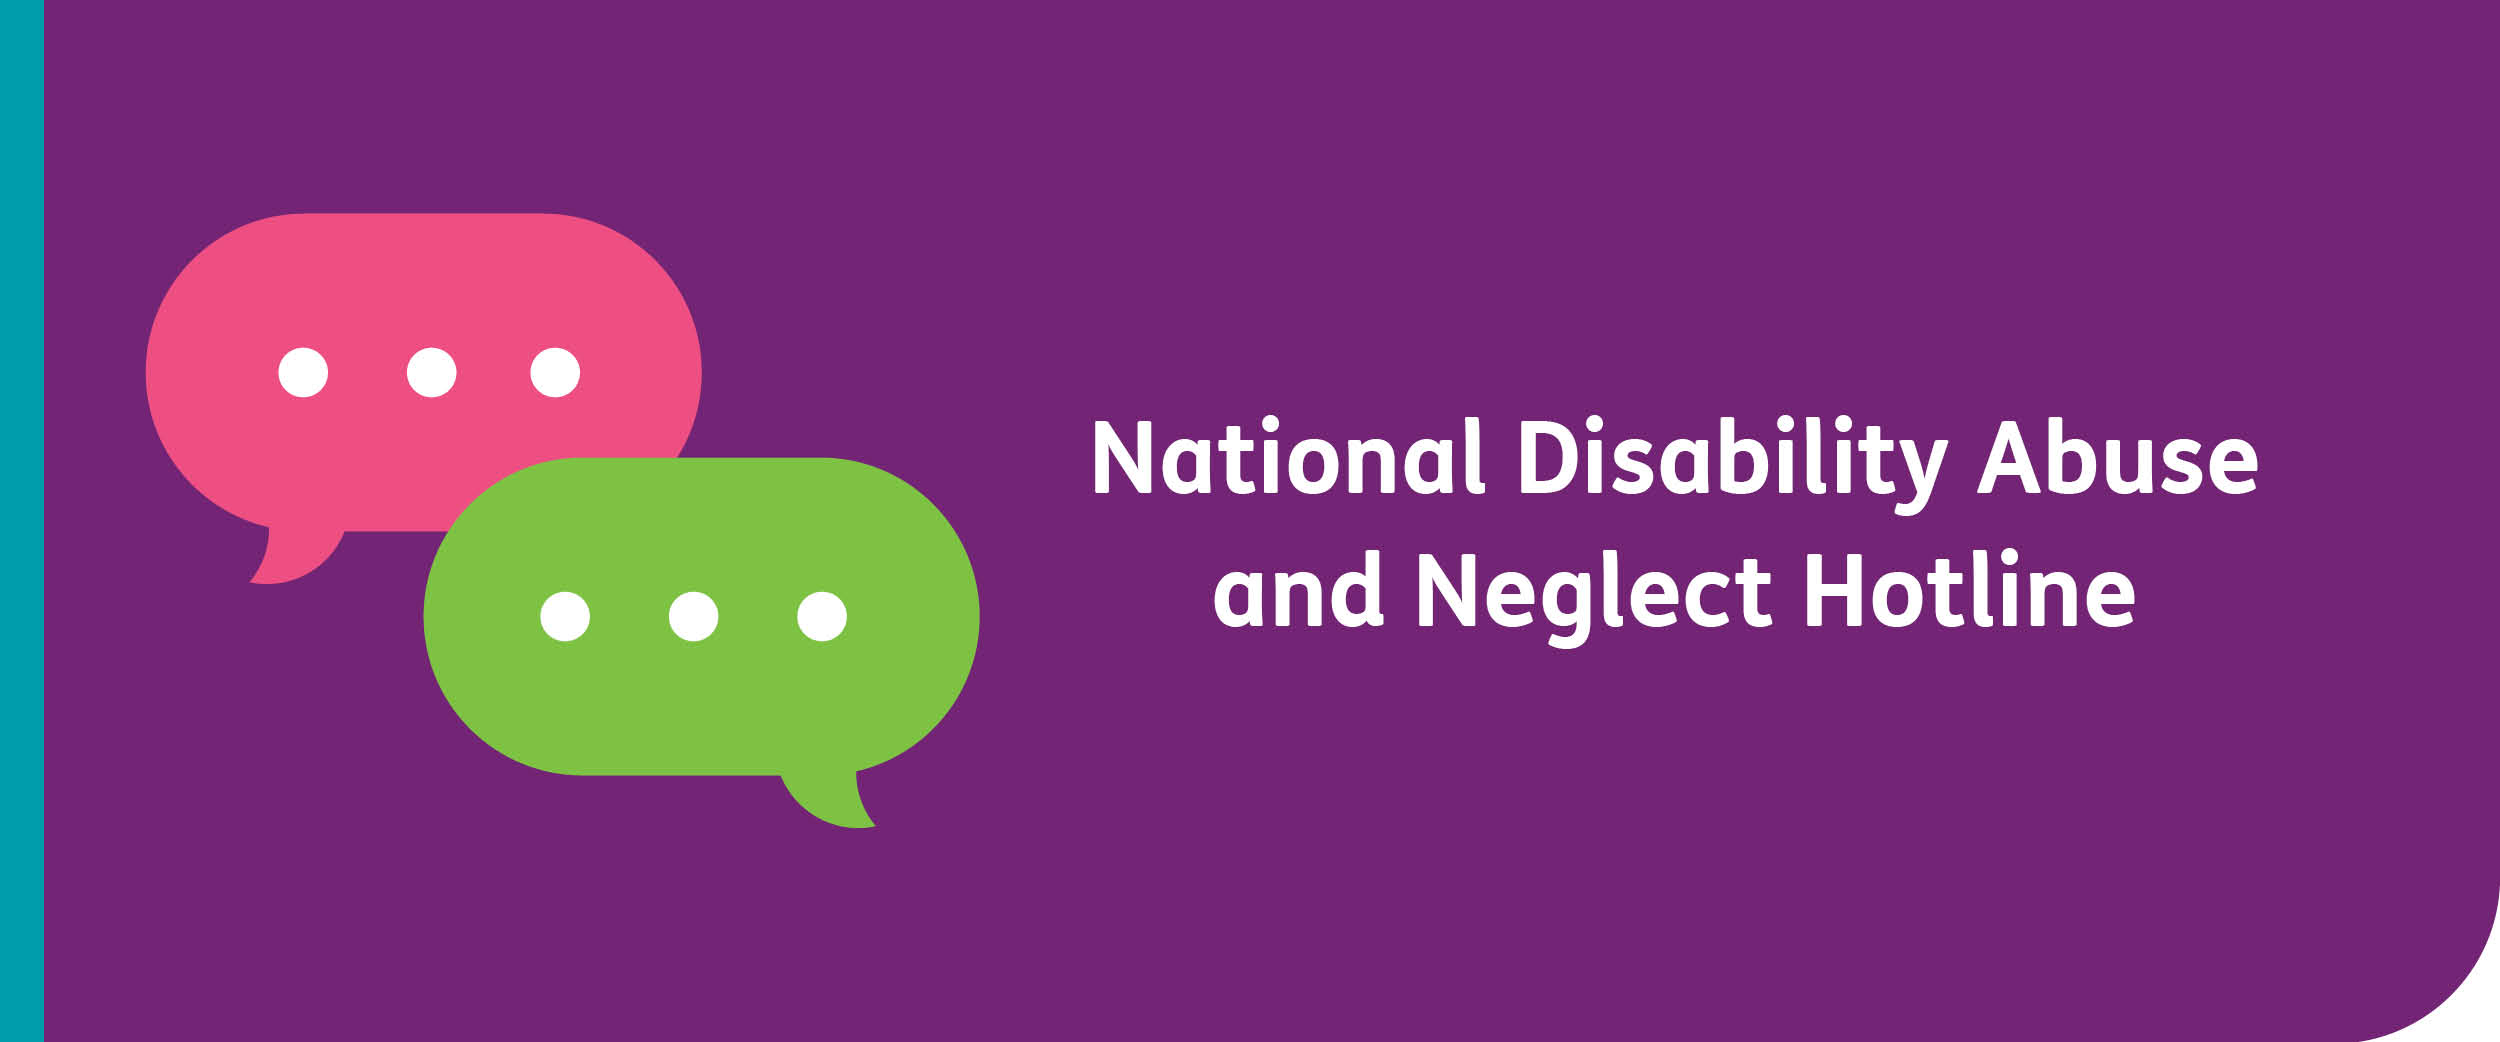 National Disability Abuse and Neglect Hotline with a cartoon of 2 speech bubbles